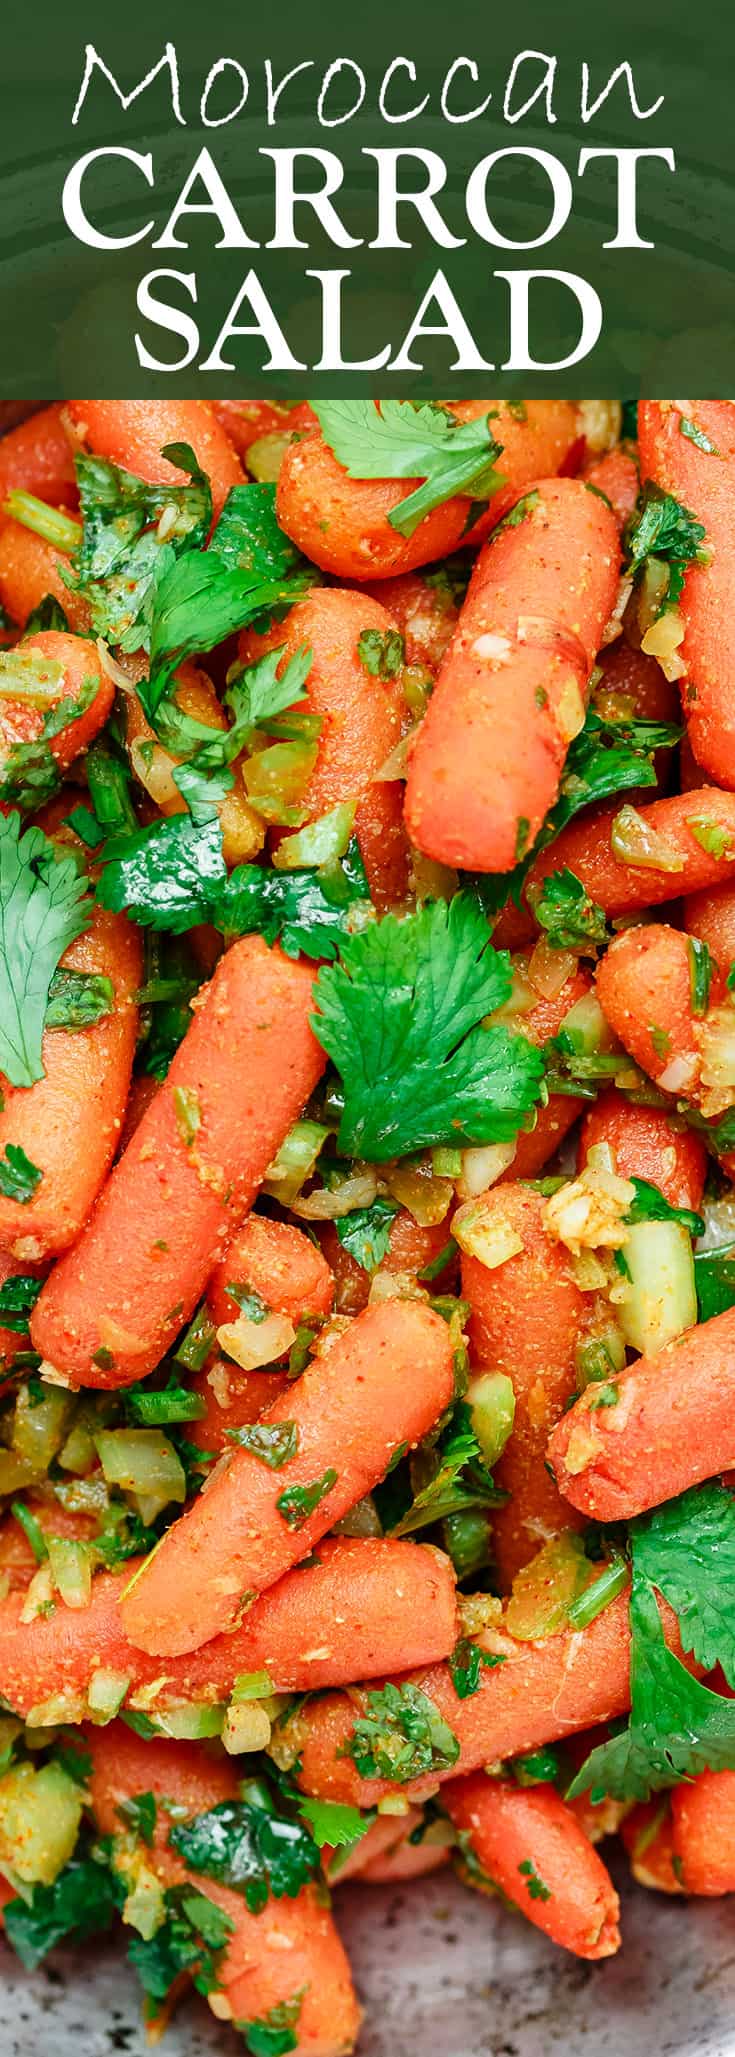 Moroccan Carrot Salad | The Mediterranean Dish. A simple, flavor-packed carrot salad with celery, cilantro and cumin. A simple lemon juice and olive oil dressing brings it all together. The perfect addition to any dinner! See it on TheMediterraneanDish.com